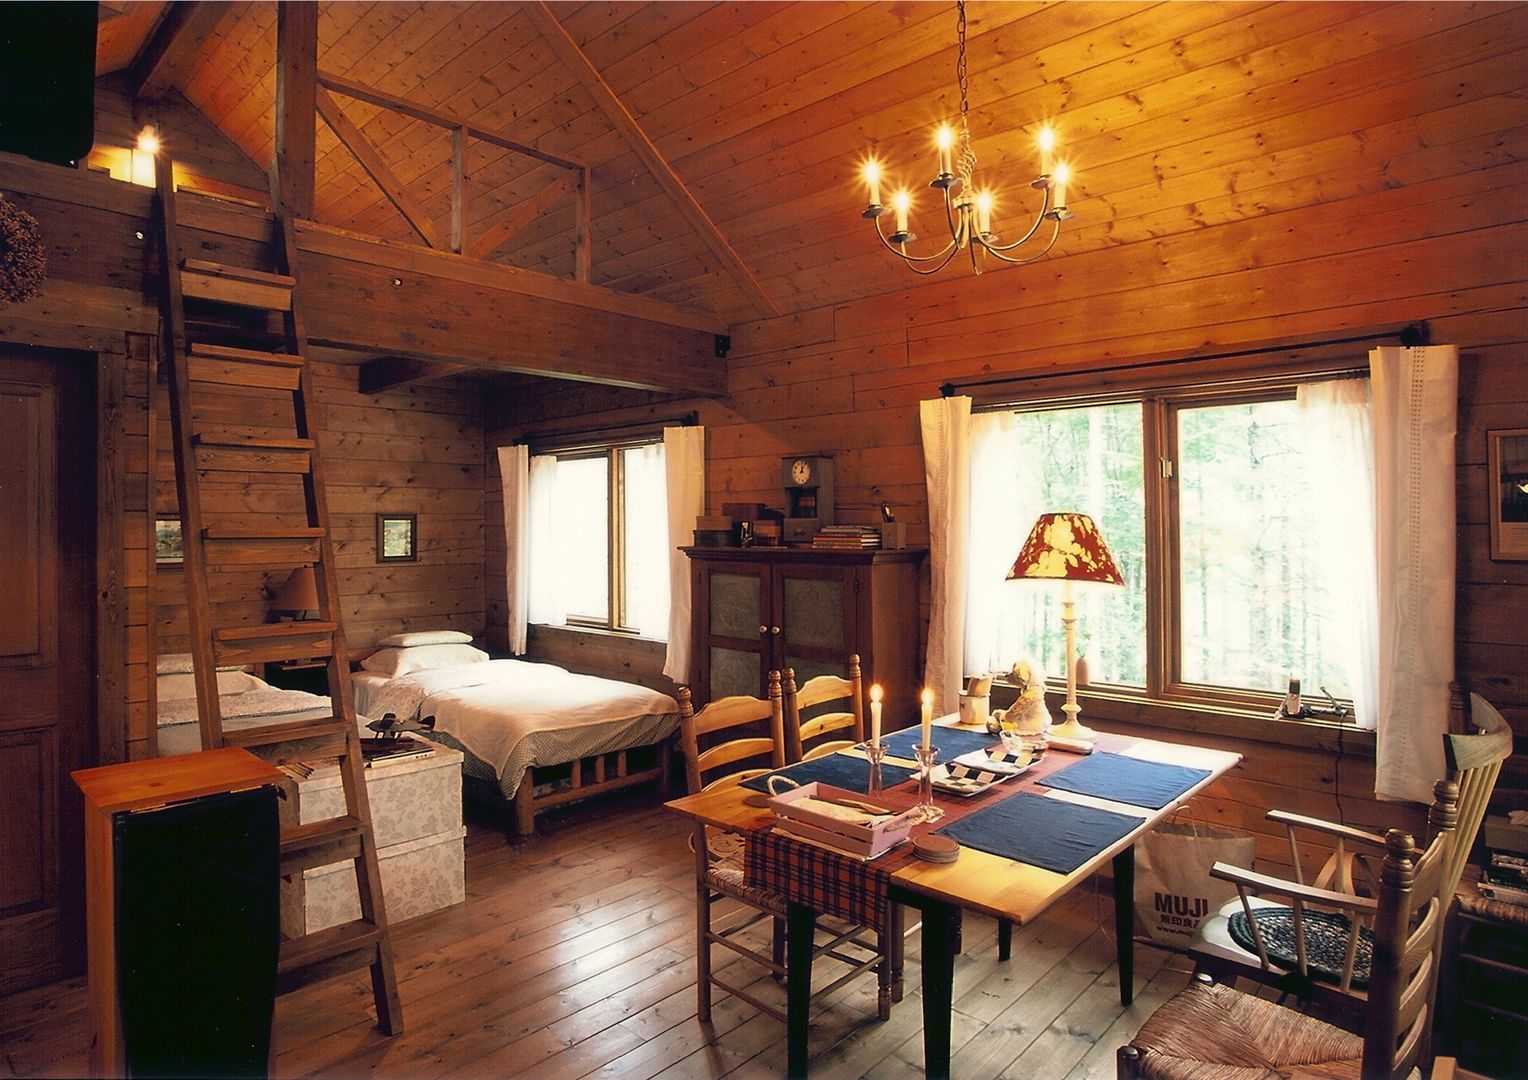 Small Cottage at Mt.Yatsugatake, Japan, Cottage Style / コテージスタイル Cottage Style / コテージスタイル Вітальня